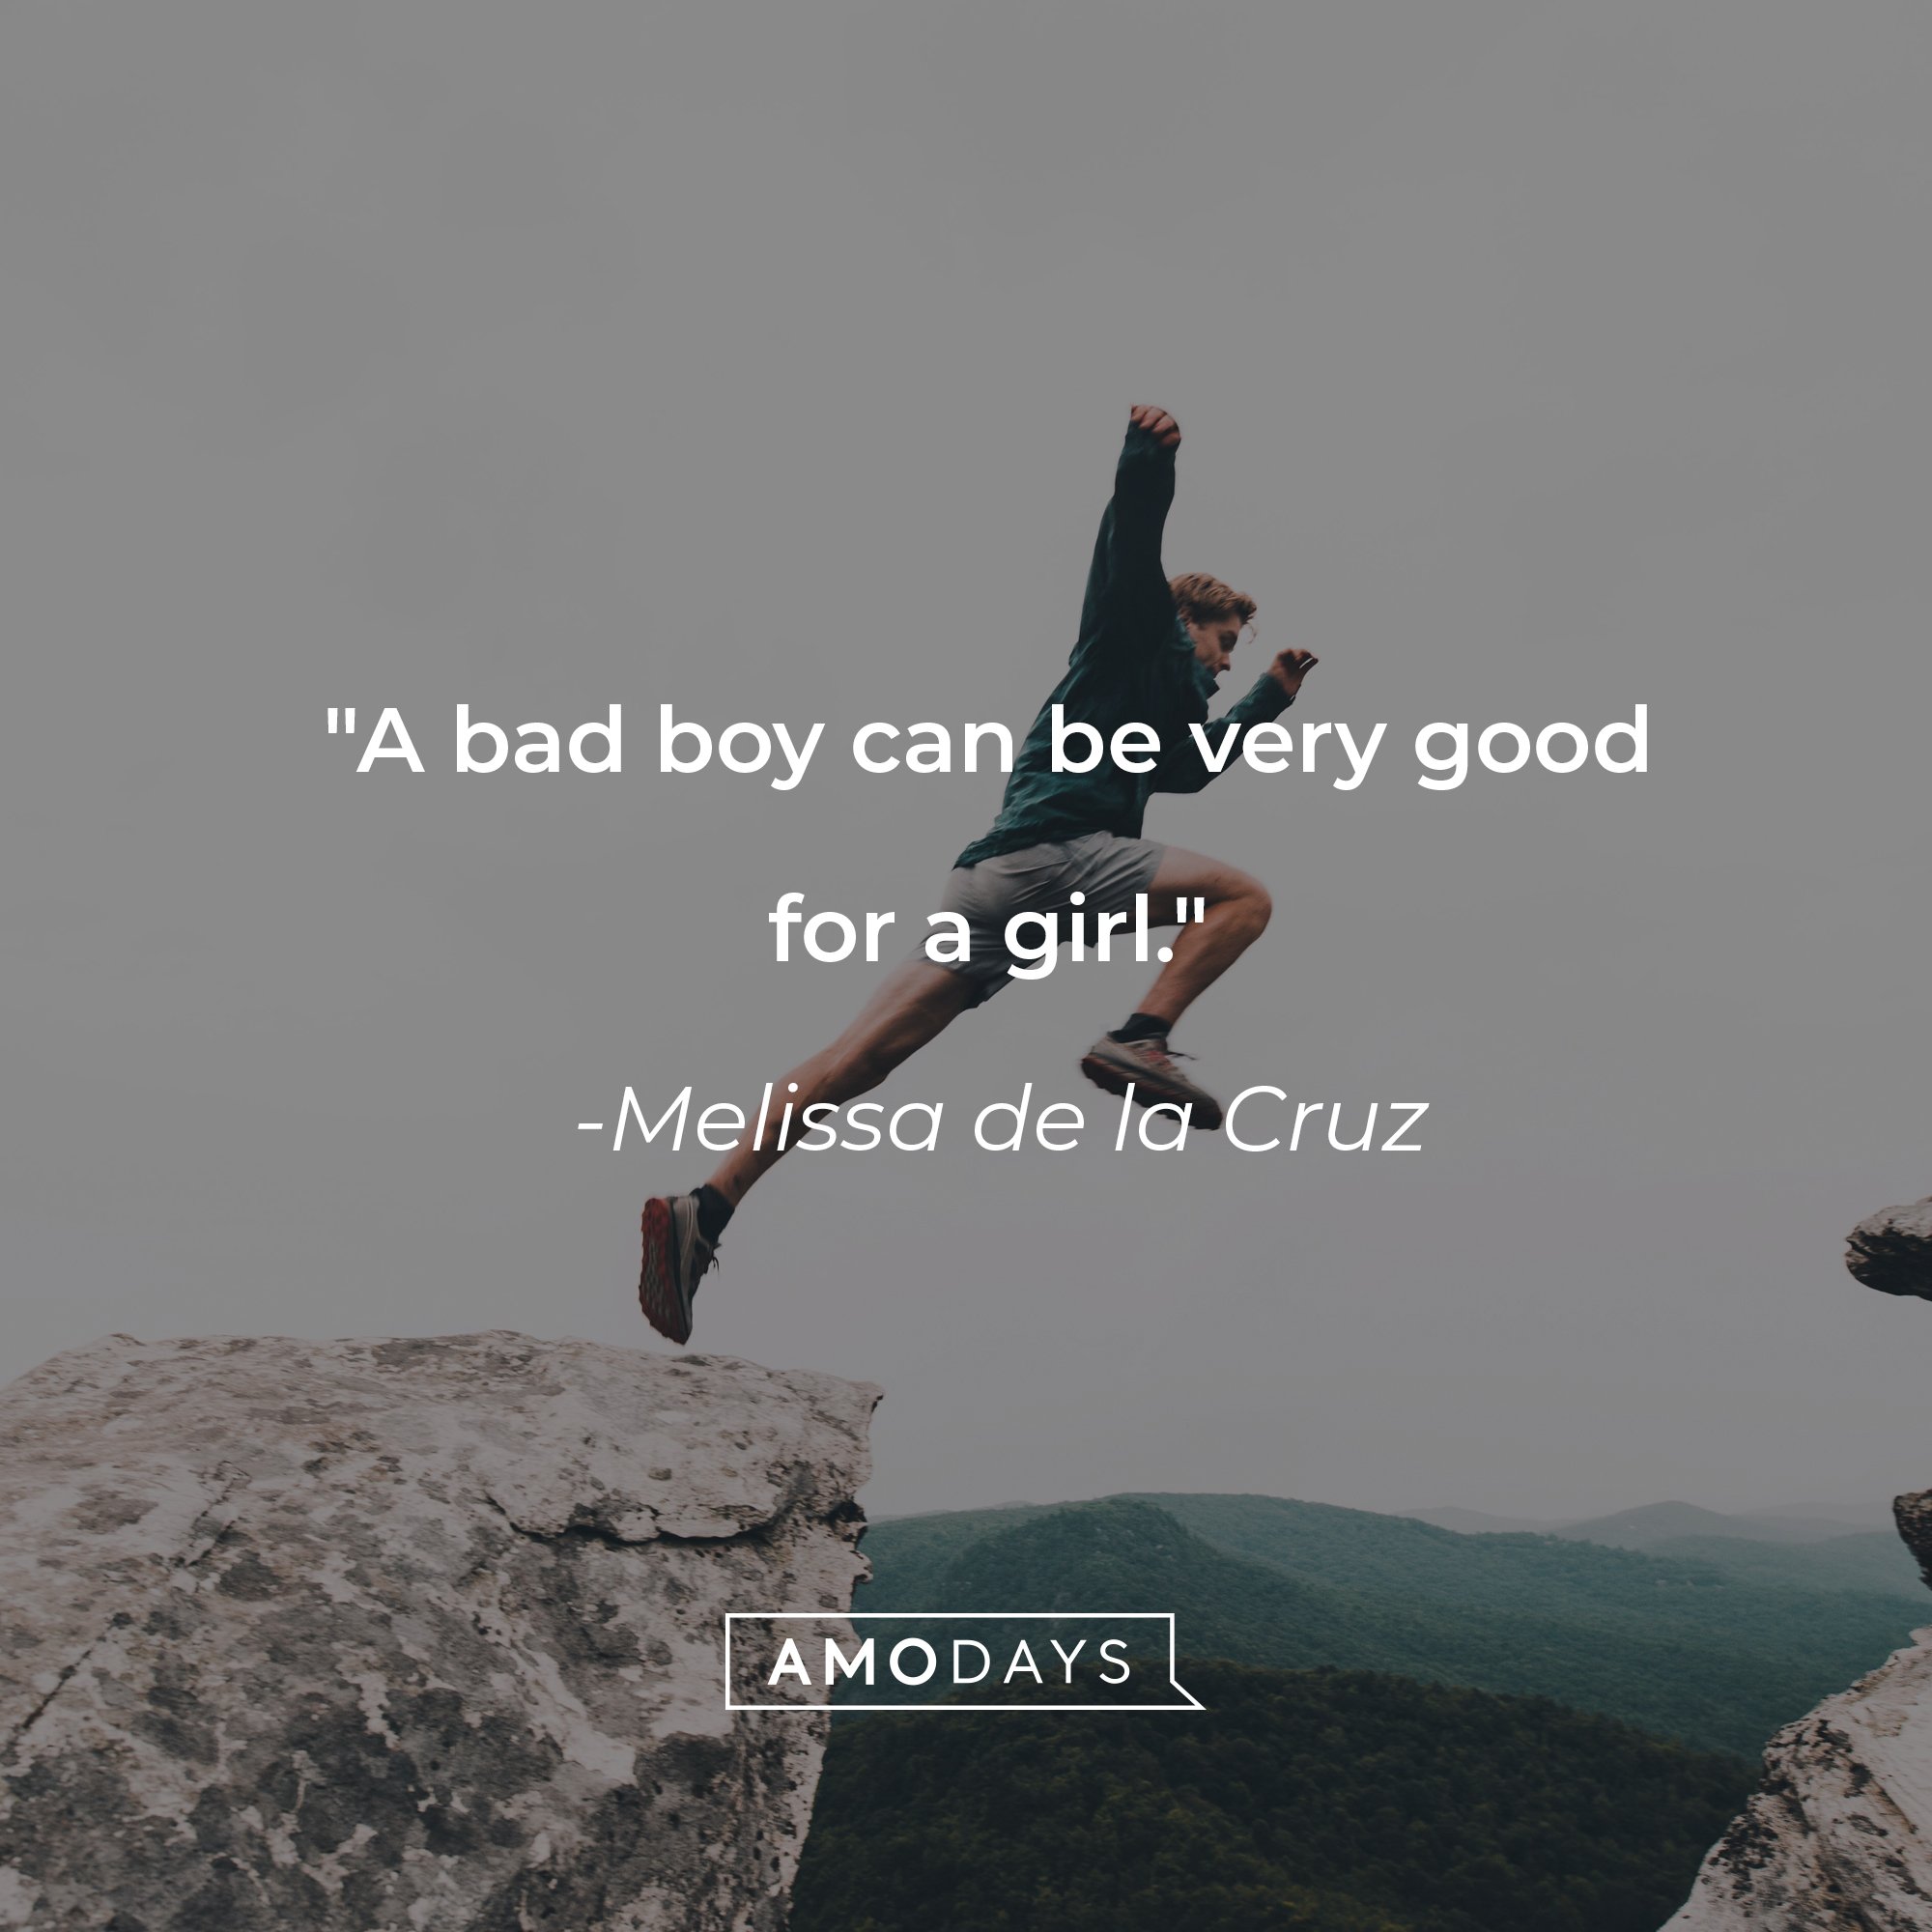 Melissa de la Cruz's quote: "A bad boy can be very good for a girl." | Image: AmoDays